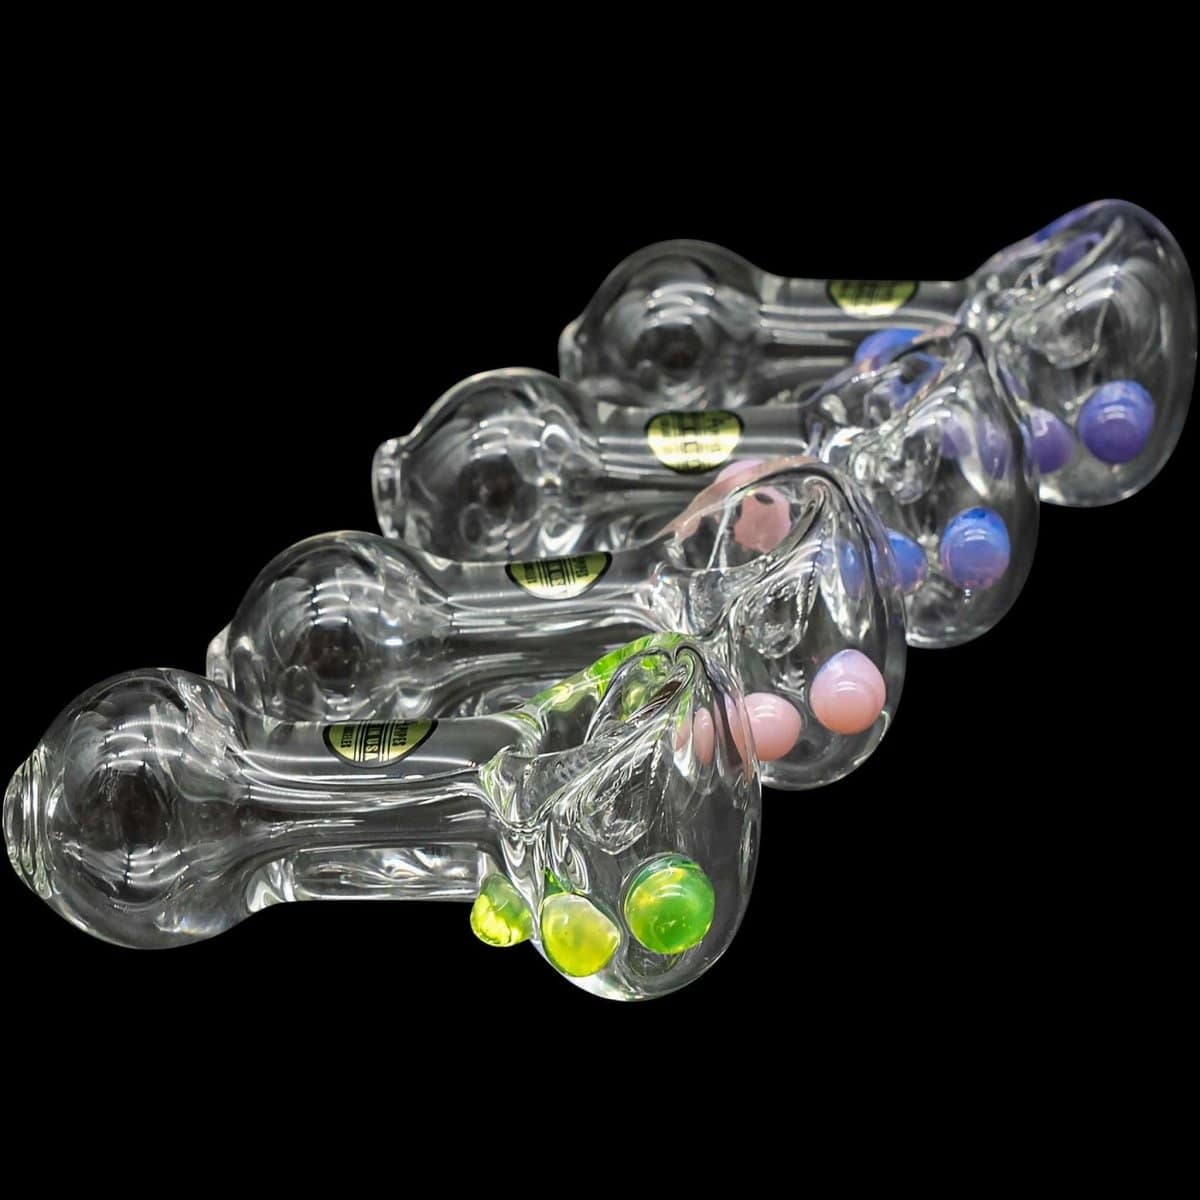 LA Pipes Hand Pipe Purple Slime "Thick Ass" Glass Spoon Pipe